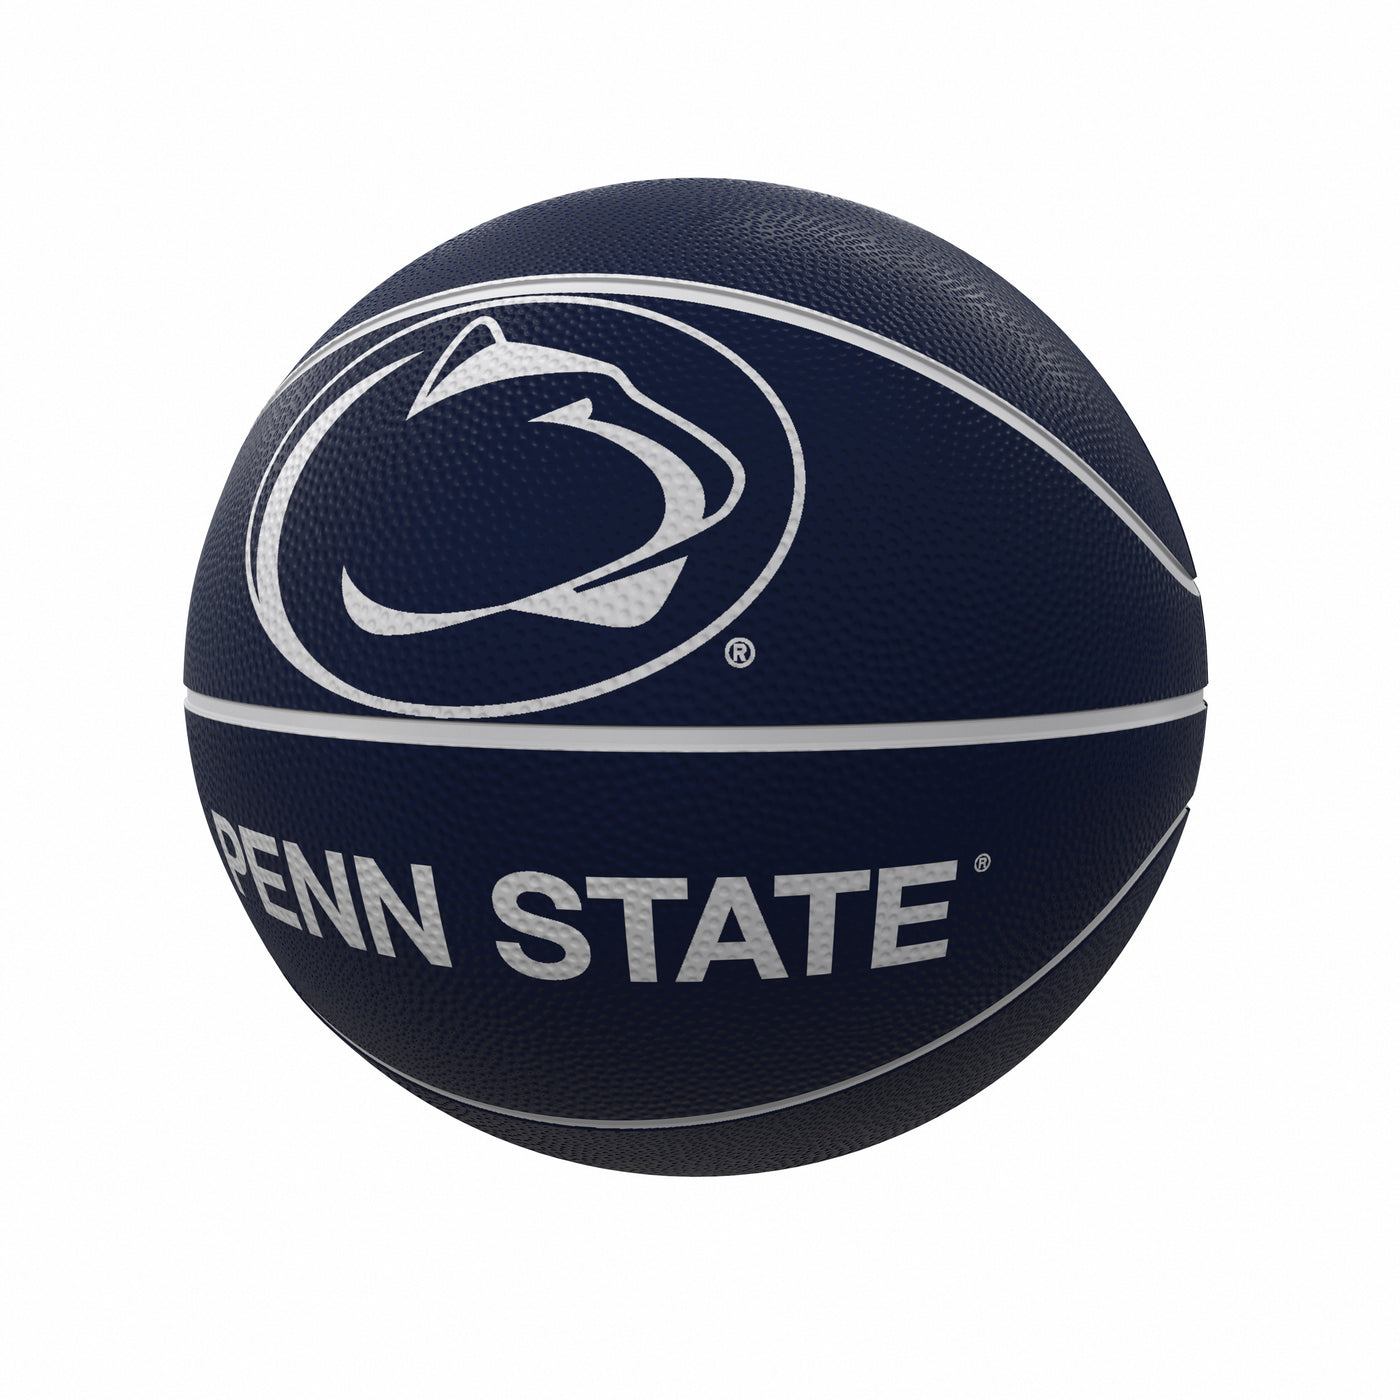 Penn State Mascot Official-Size Rubber Basketball